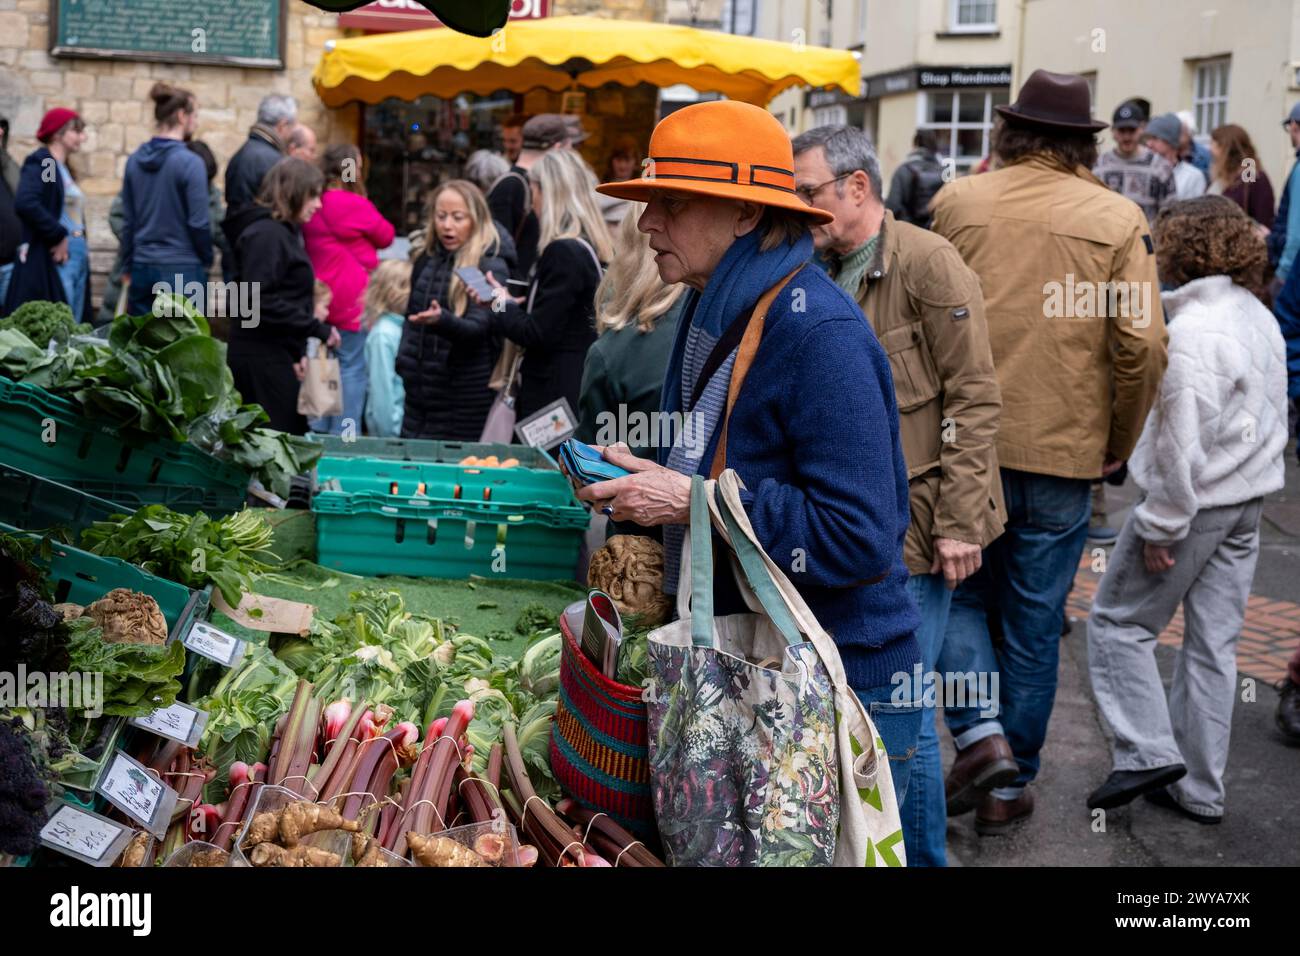 People buying vegatables from a fruit and veg stall at Stroud Farmers Market on 30th March 2024 in Stroud, United Kingdom. Stroud is a market town and civil parish in Gloucestershire, known particularly for its thriving farmers market which takes place every Saturday, specialising in the best local produce. Stock Photo